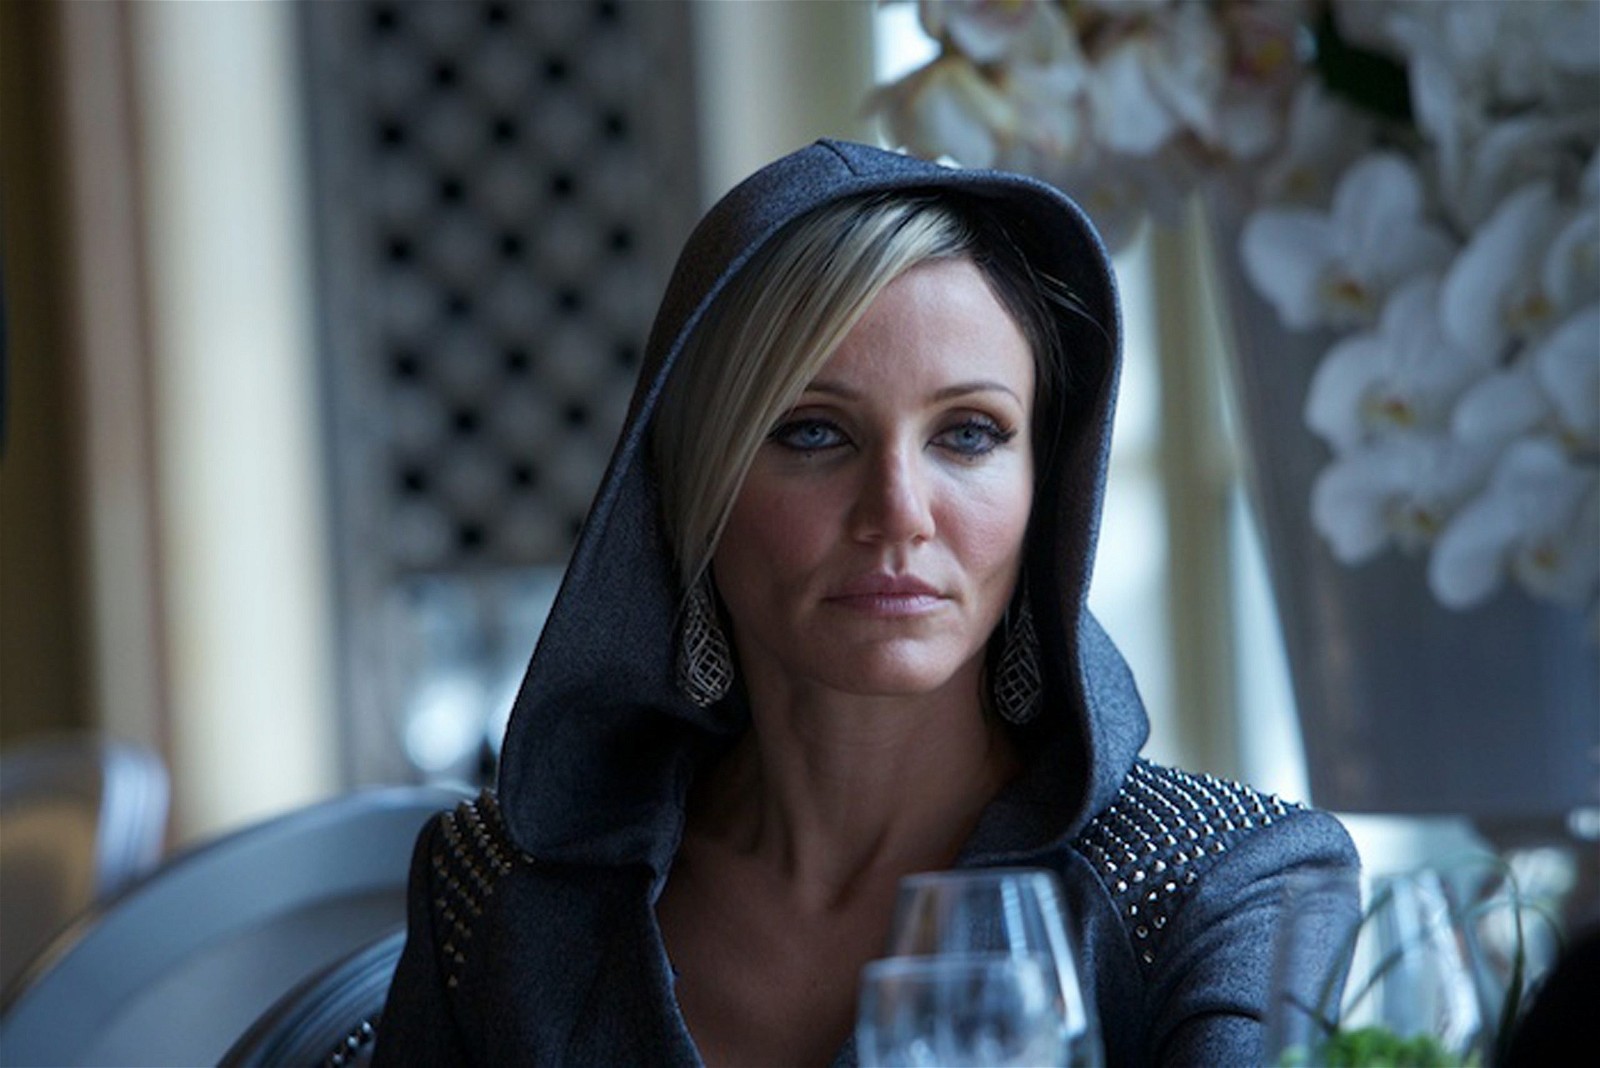 Cameron Diaz as Malkina in The Counselor